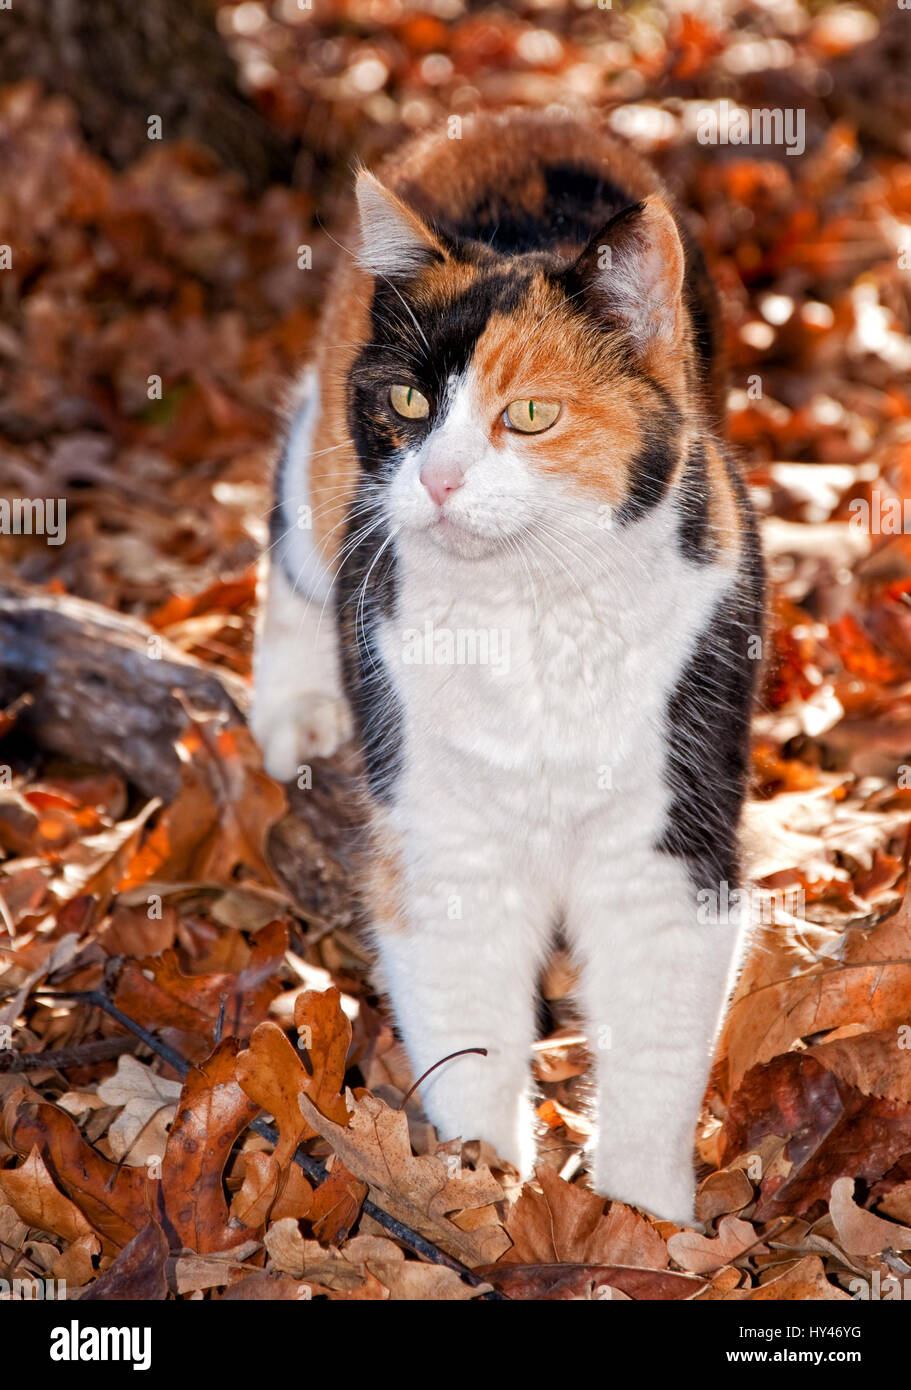 Beautiful calico cat in autumn leaves, back lit by beam of sunlight Stock Photo